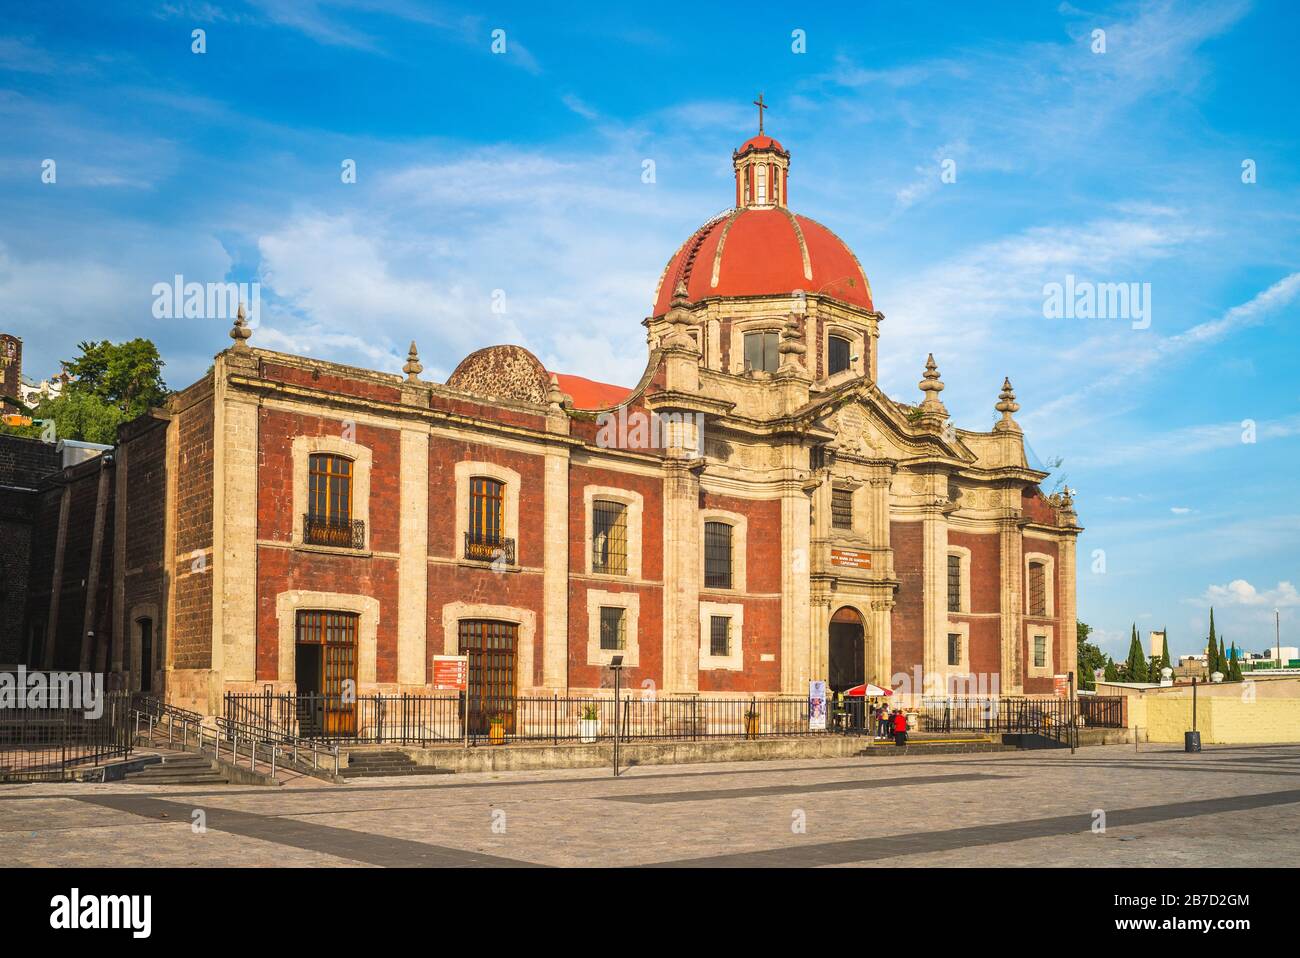 Basilica of Our Lady of Guadalupe, mexico city Stock Photo